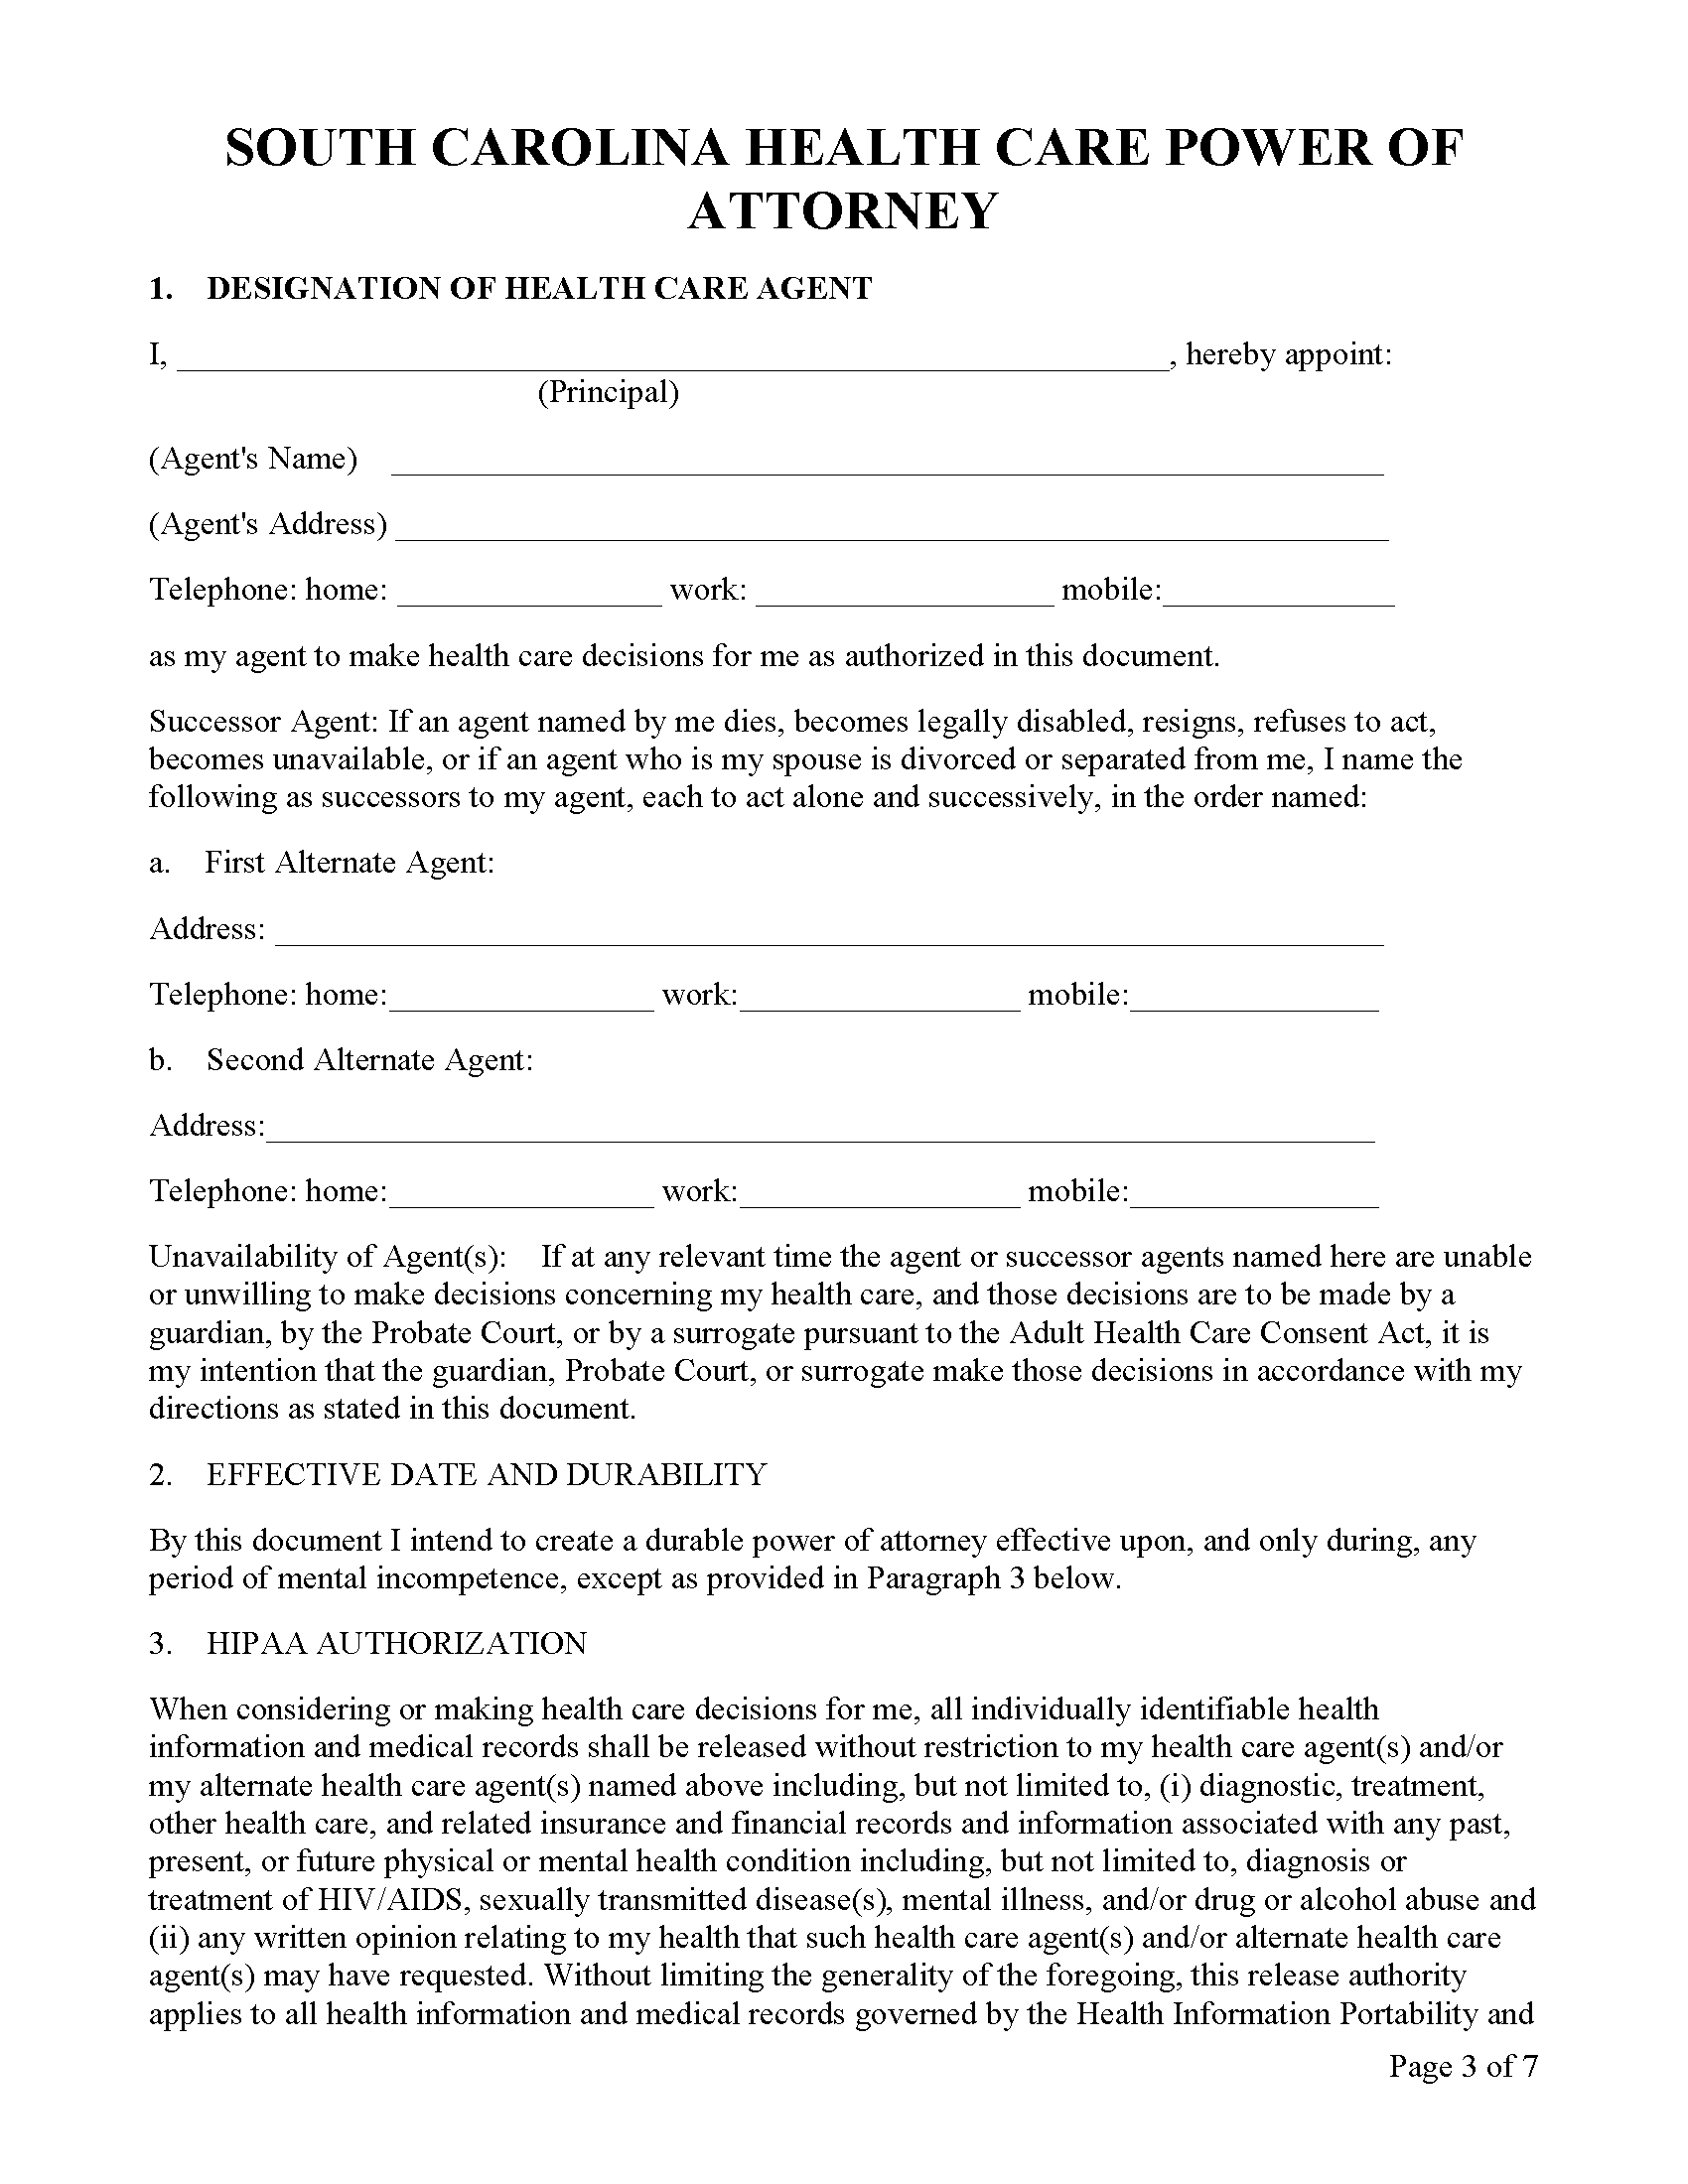 medical-power-of-attorney-printable-form